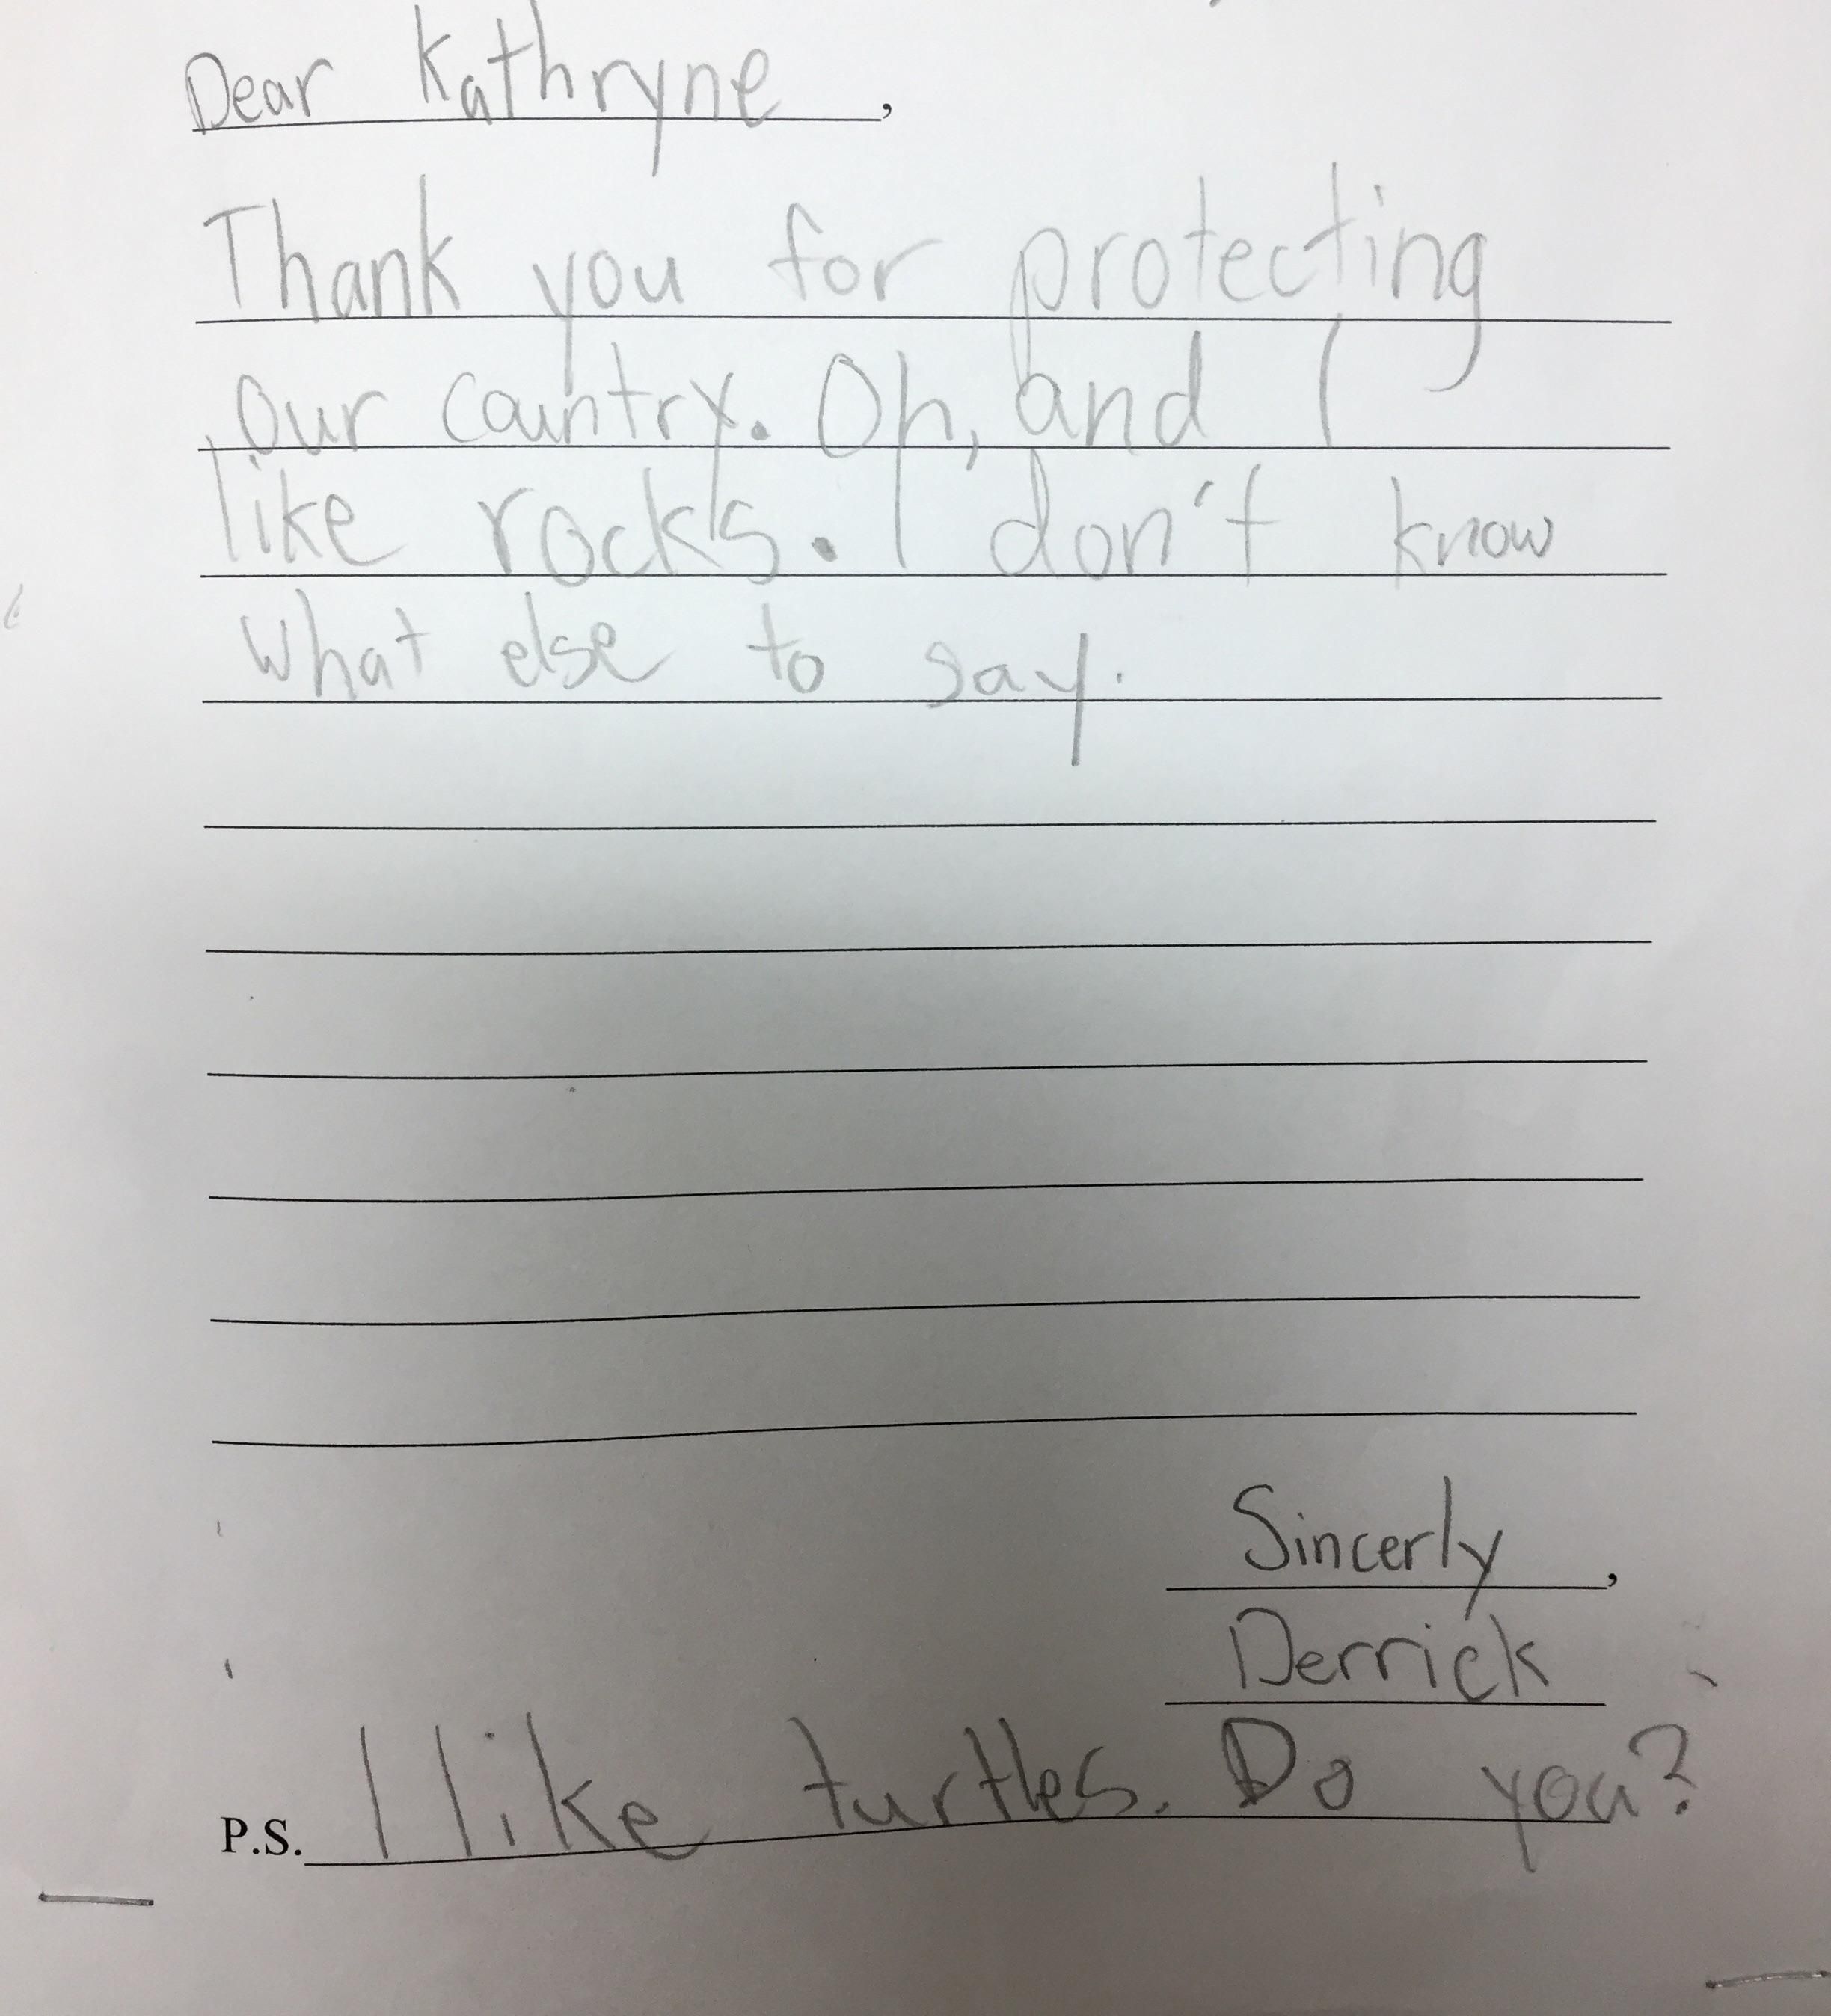 My wife is deployed. Some first graders sent her letters for Christmas. This is her favorite.